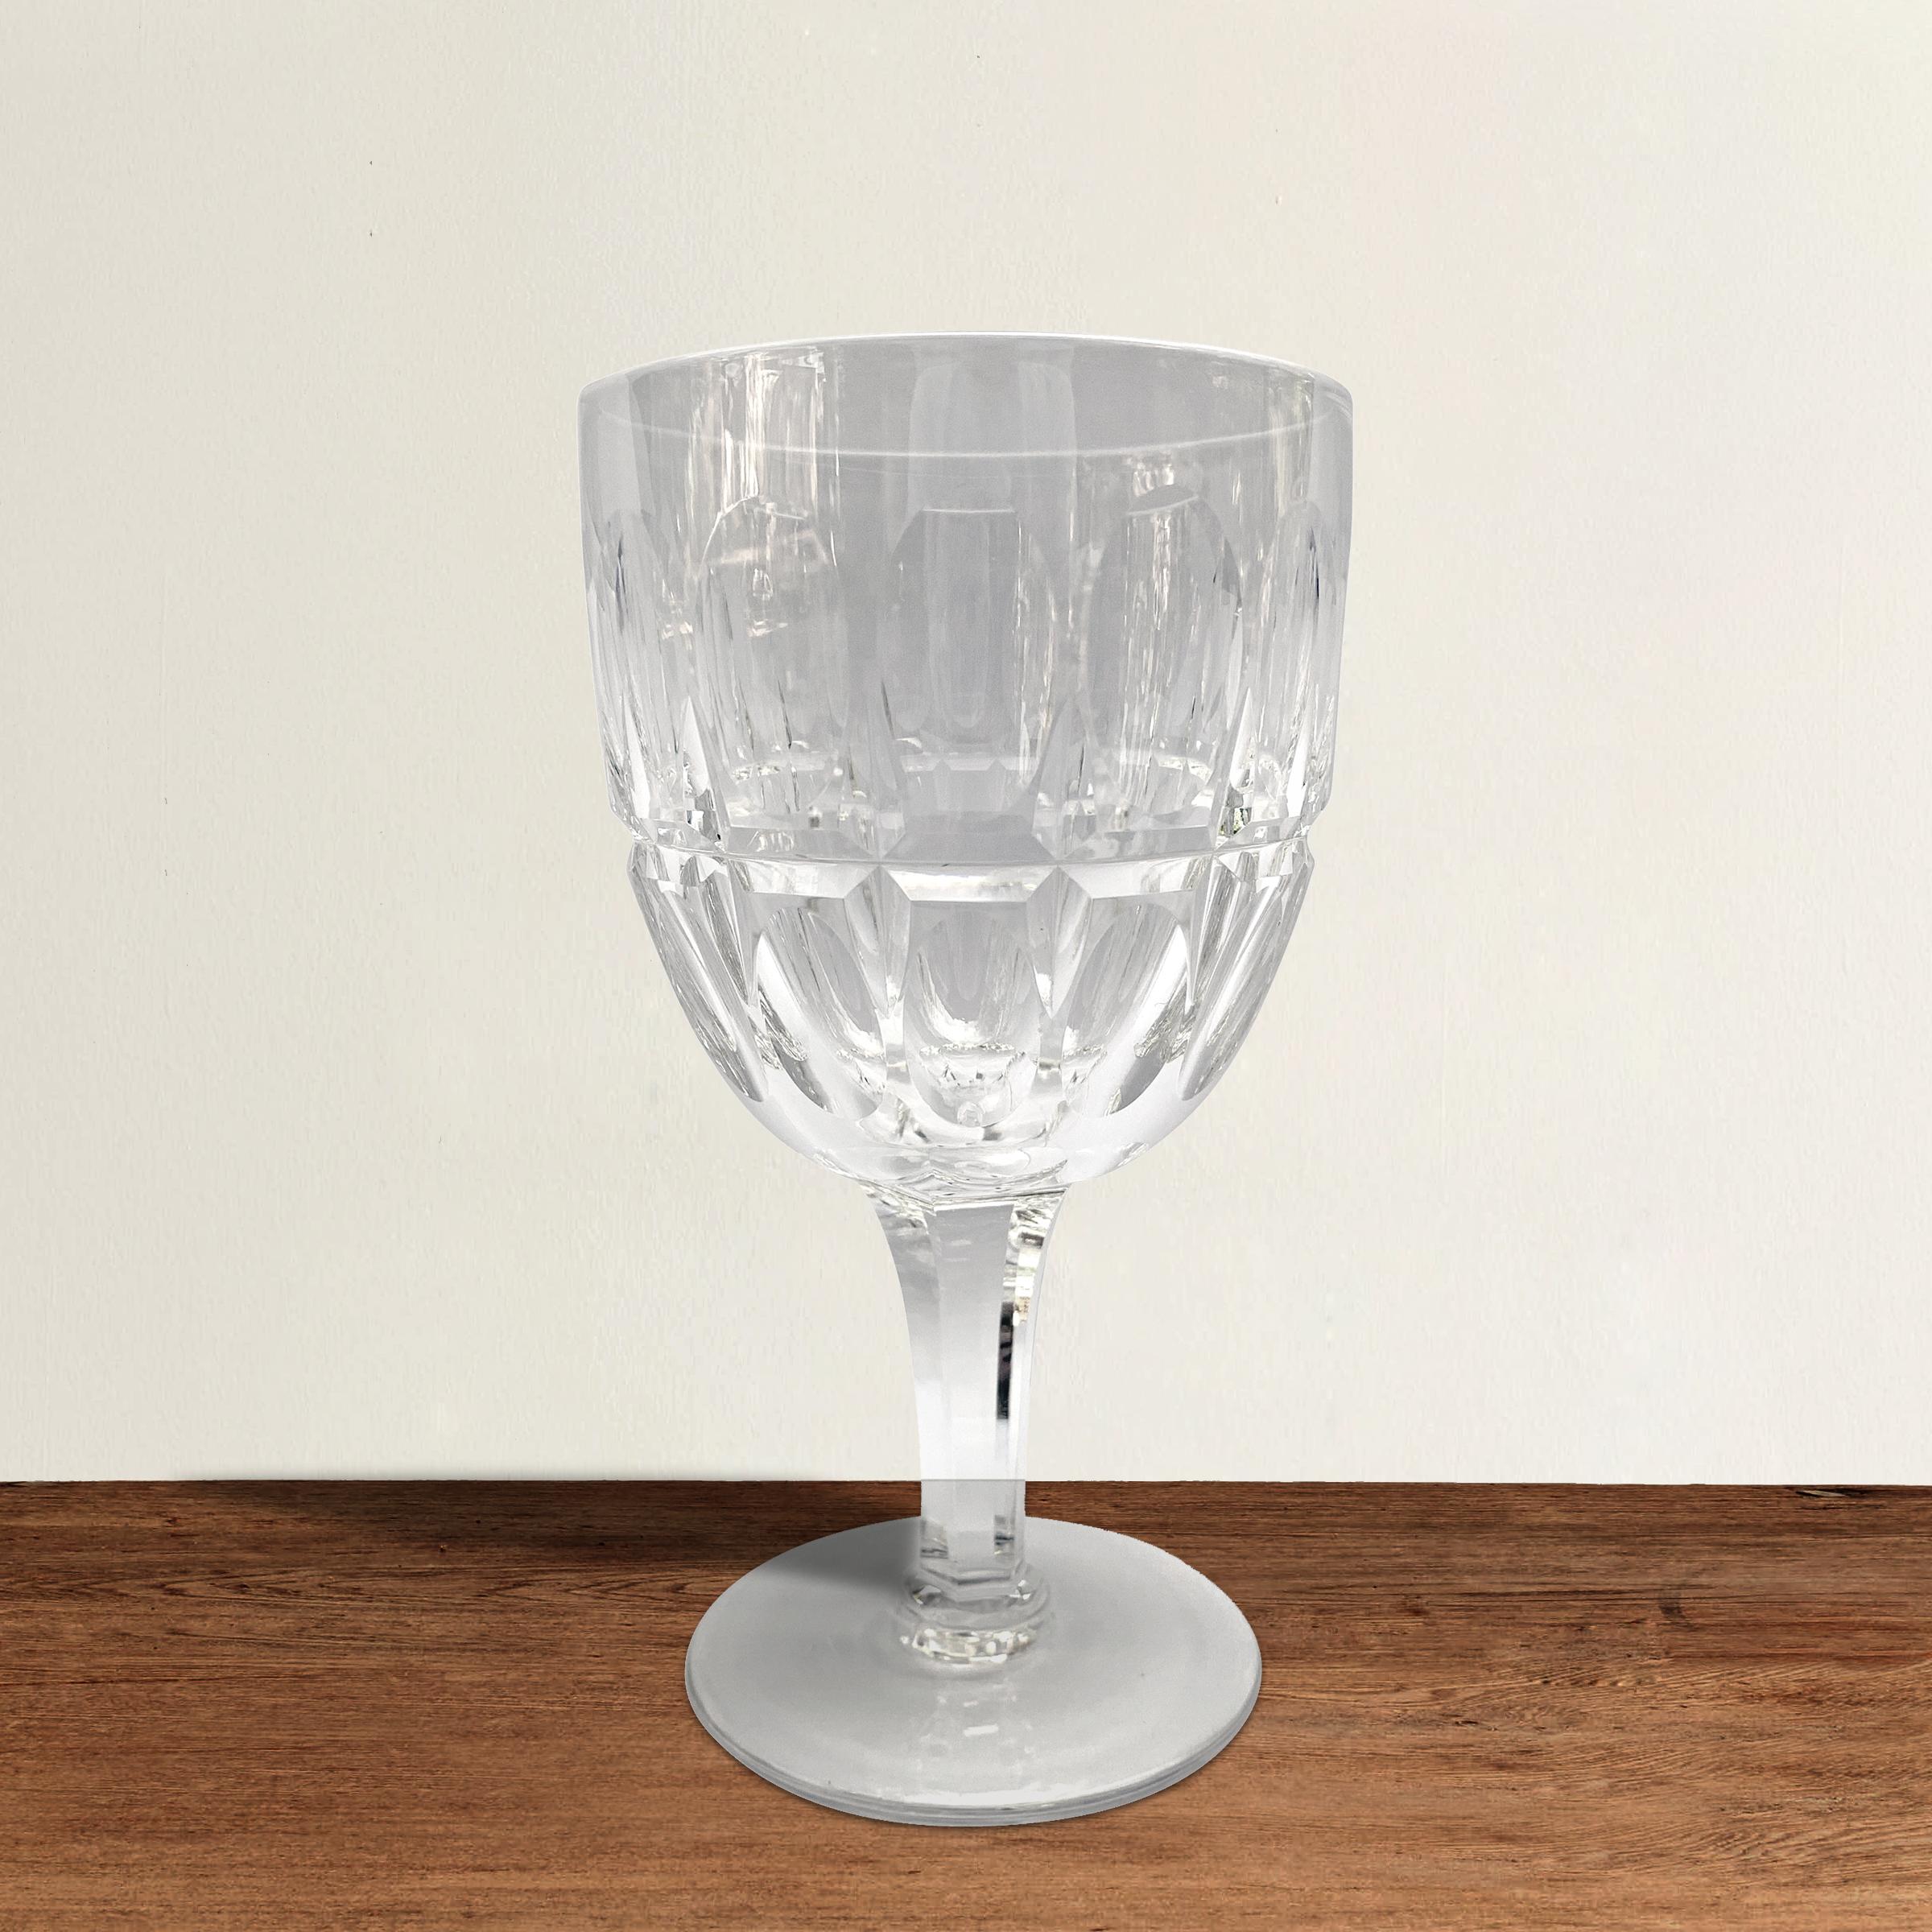 A wonderful set of ten mid-20th century English Stuart crystal wine glasses with wheel and panel cut design including thumbprint impressions around the top and bottom of each bowl.